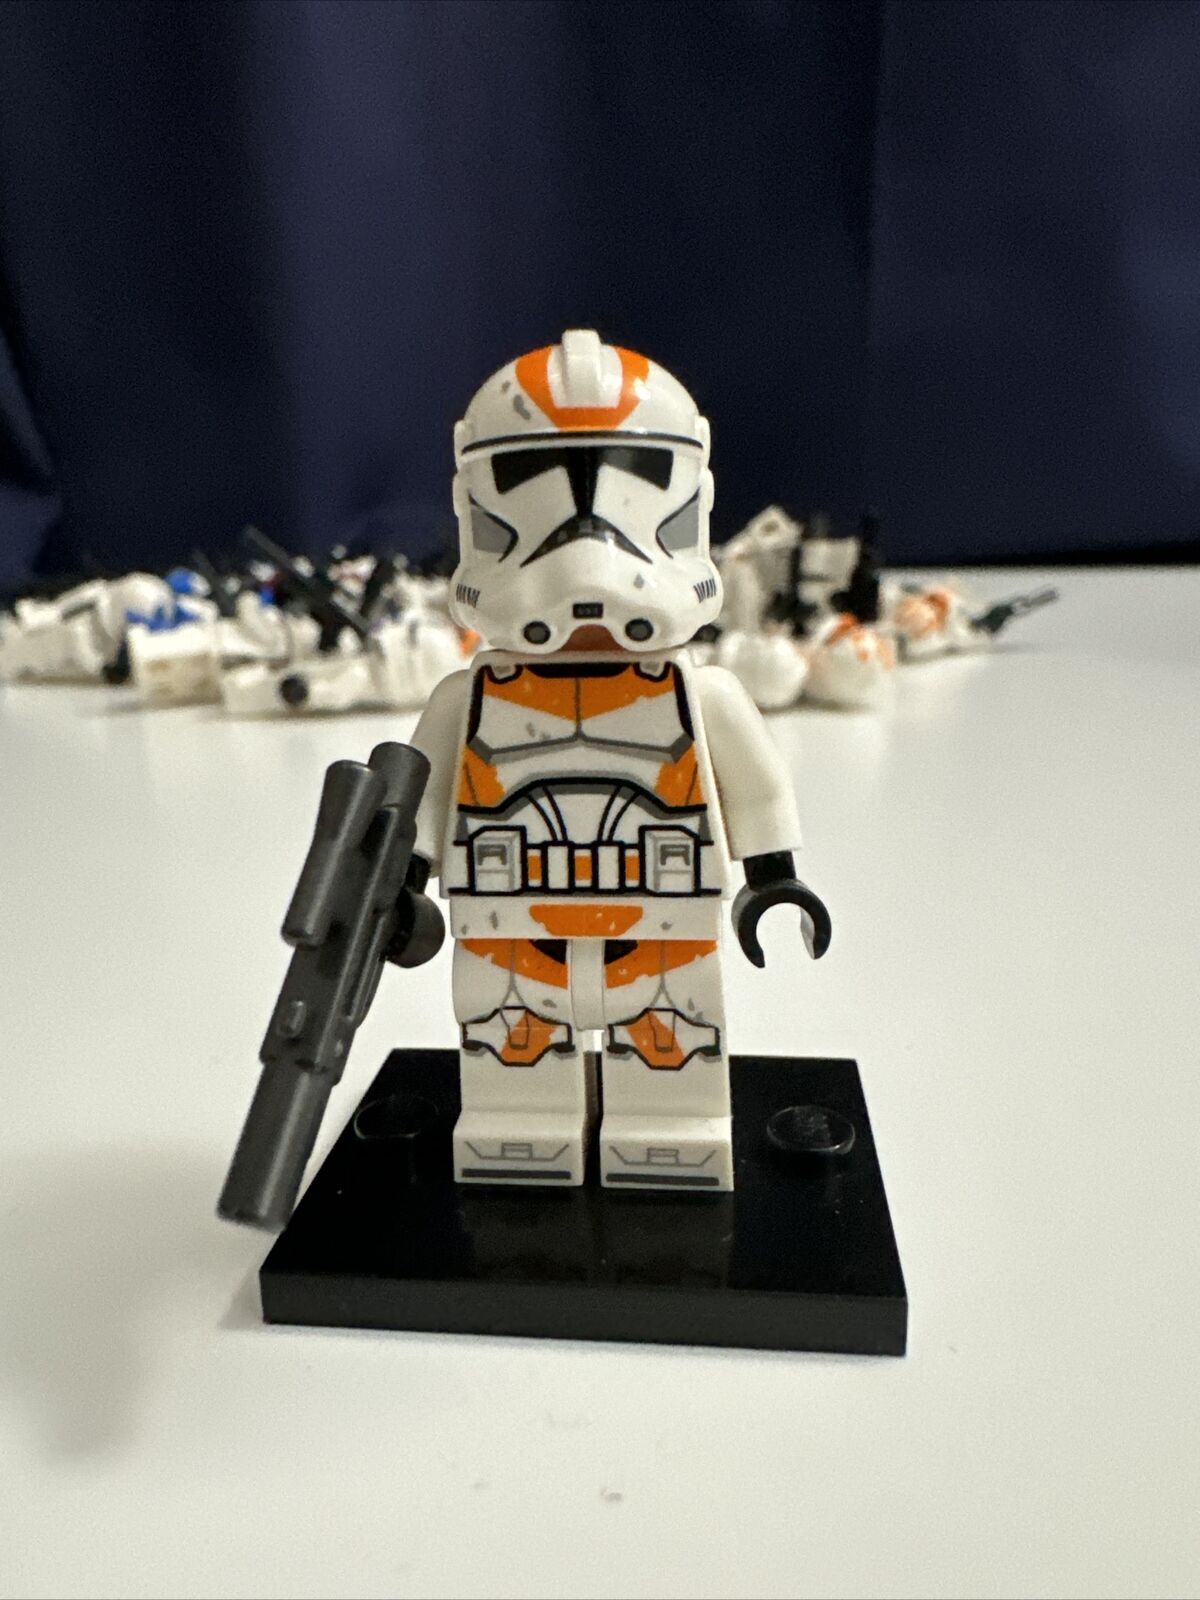 Lego Star Wars 212th Clone Troopers